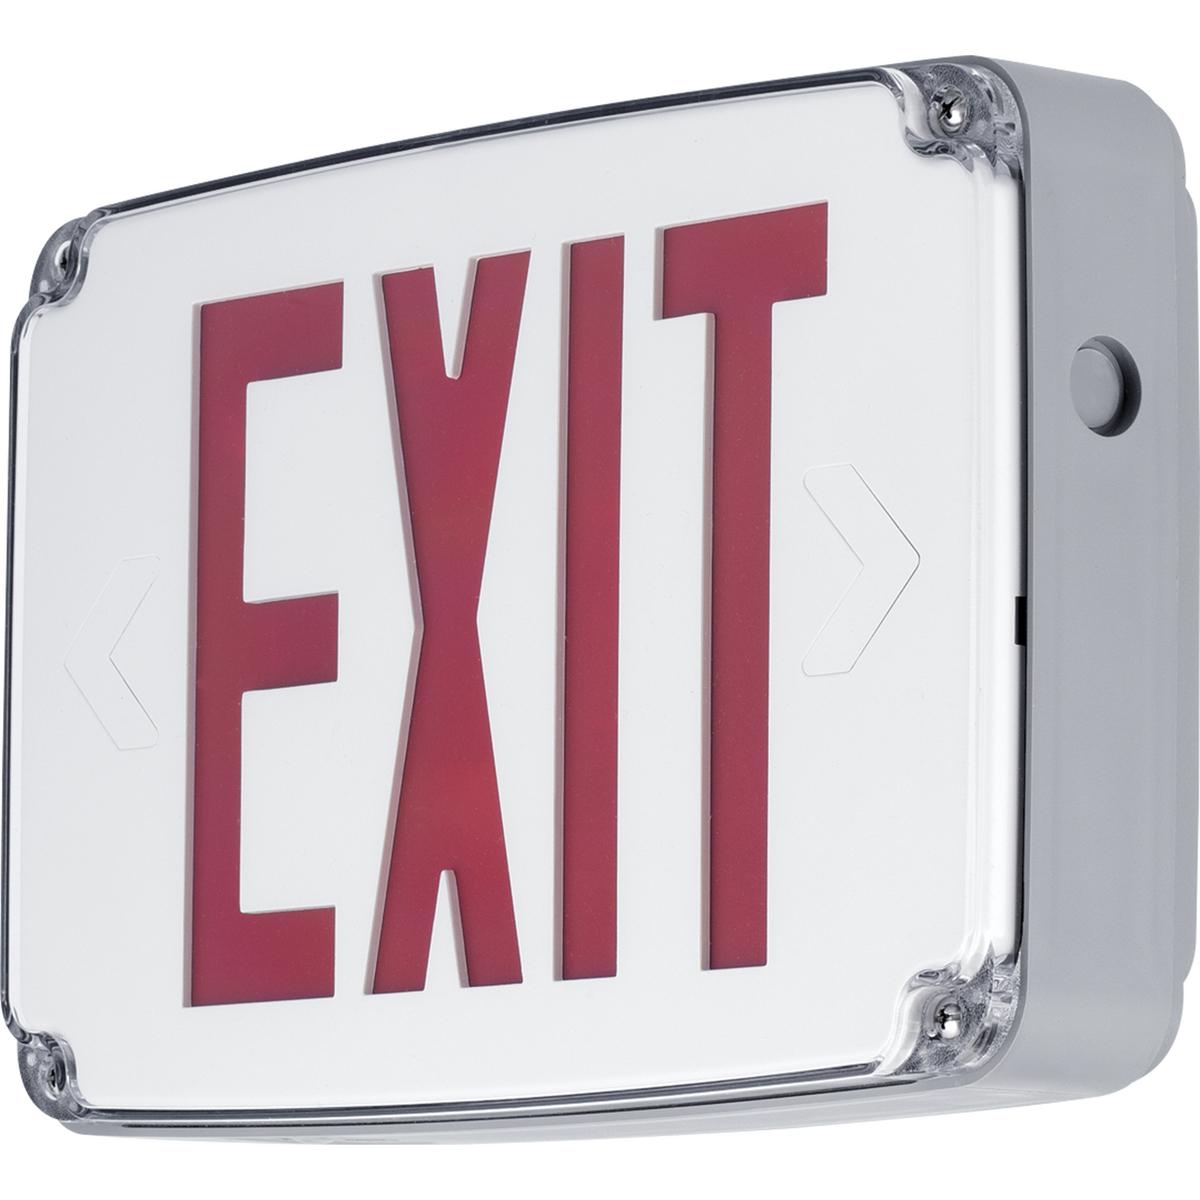 Hubbell PEWLE-SR-30 The PEWLE Series offers quality and value with a wet location rated emergency Exit sign. Housing and face-plate made from impact resistant UV stabilized polycarbonate. Housing is corrosion resistant and face-plate is fully gasketed. Exit face illumination